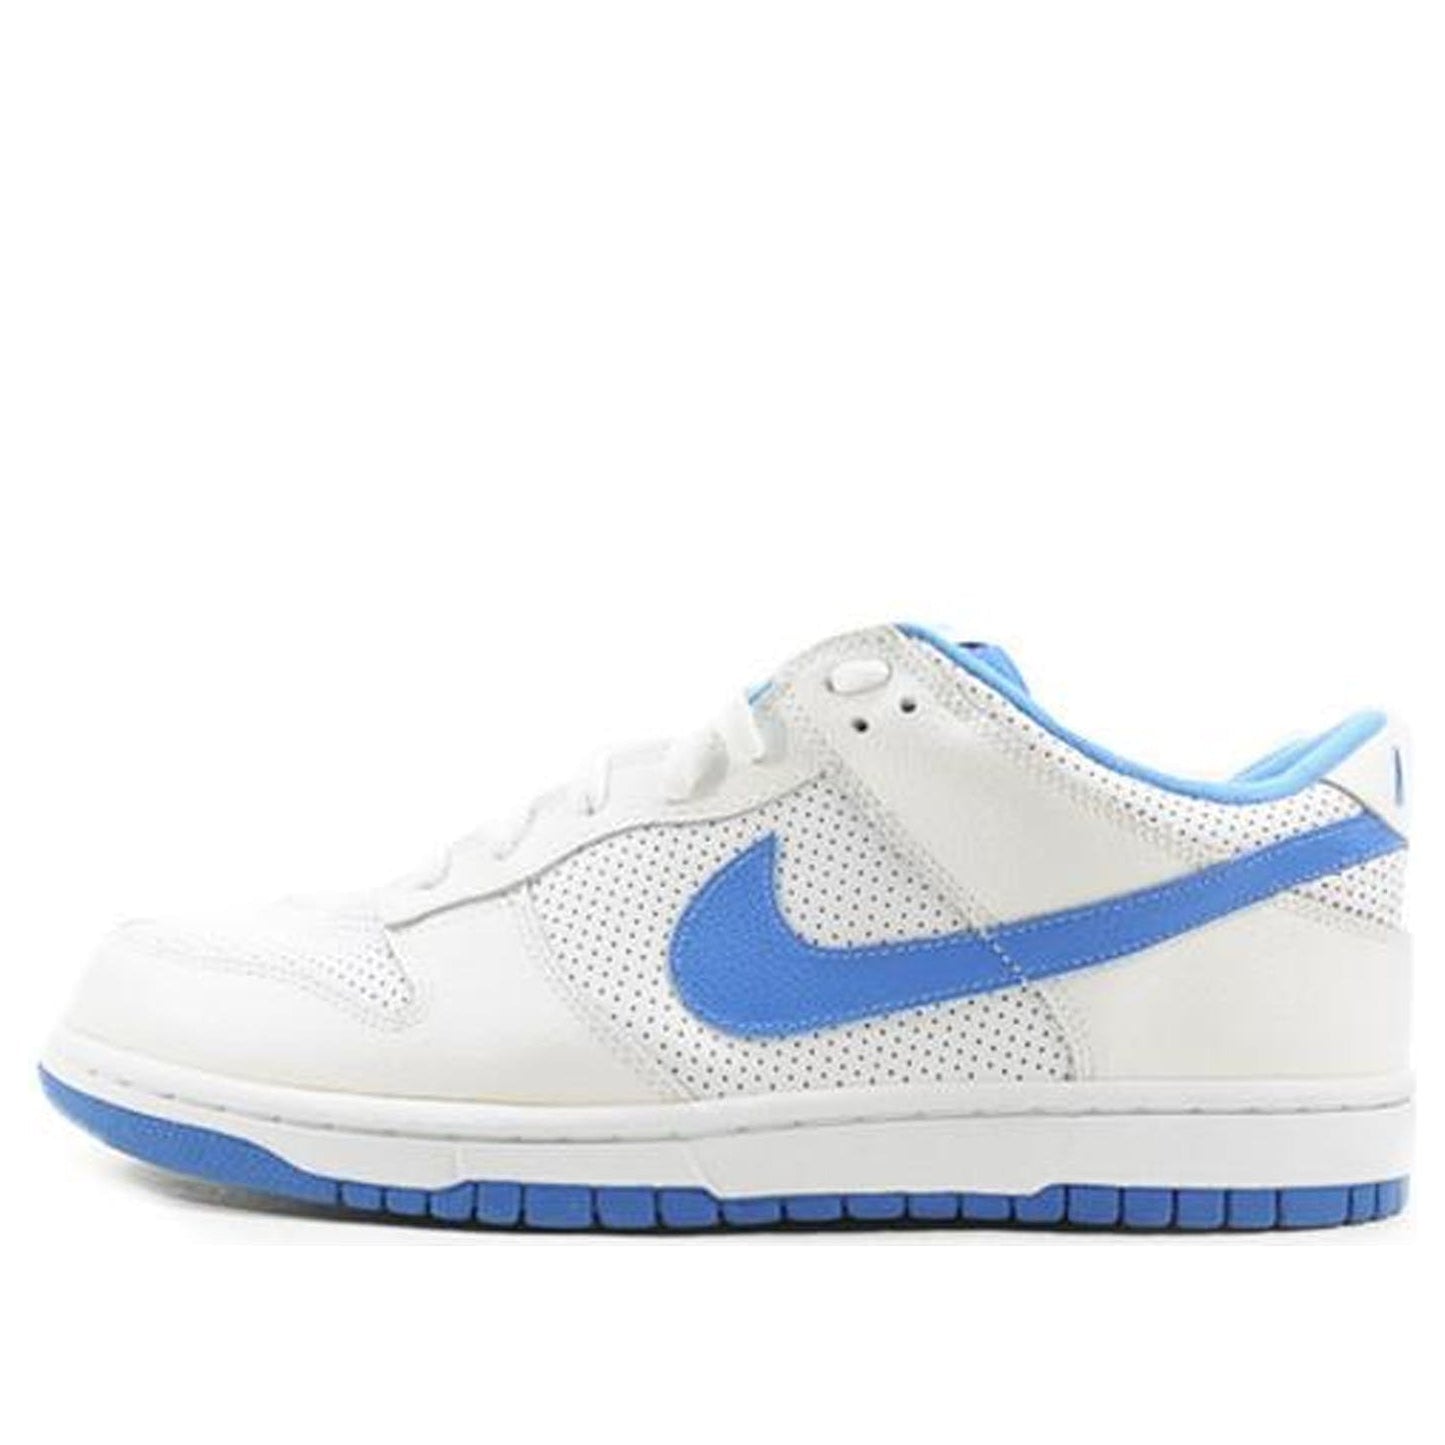 Nike Dunk Low Varsity Blue Perf White  309431-142 Iconic Trainers